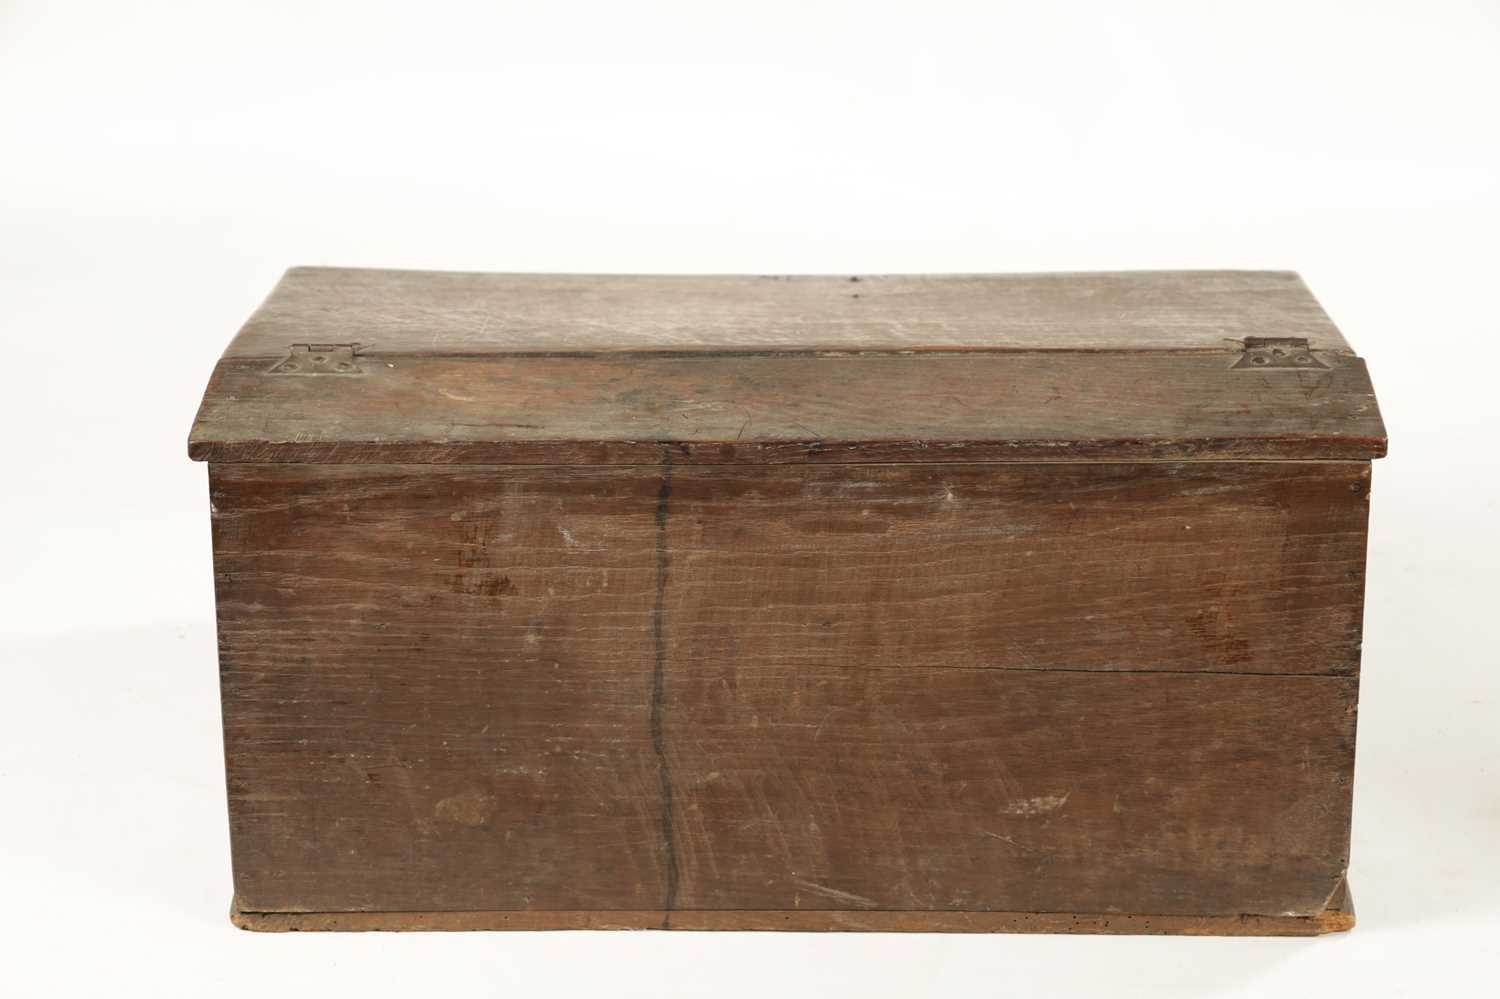 AN 17TH CENTURY SLOPE TOP OAK BIBLE BOX - Image 7 of 7